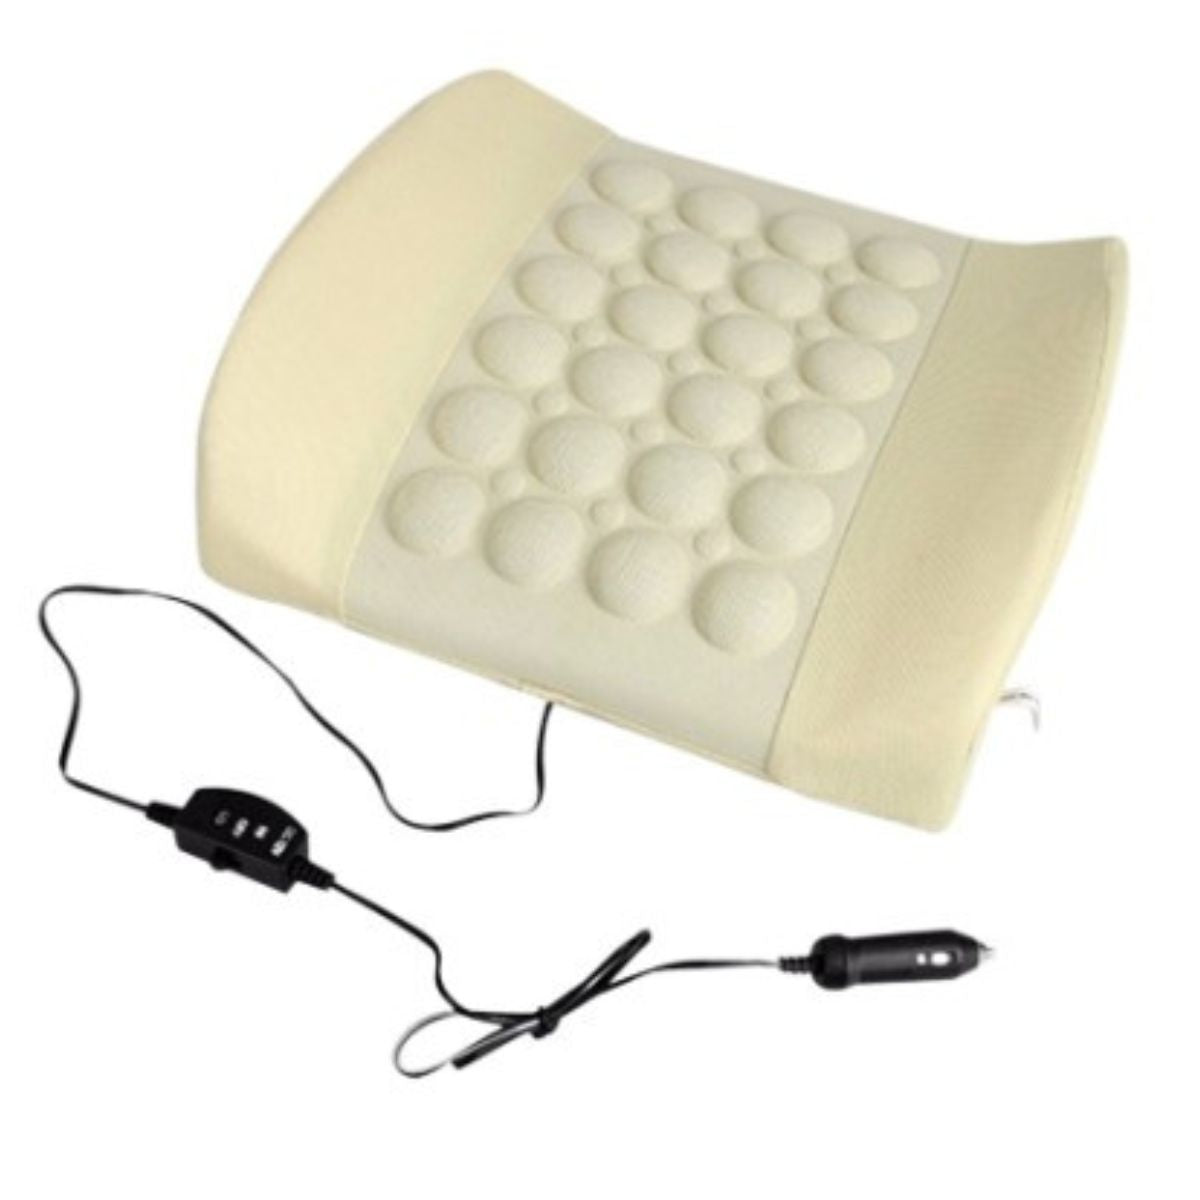 Vibration Pillow Back Support